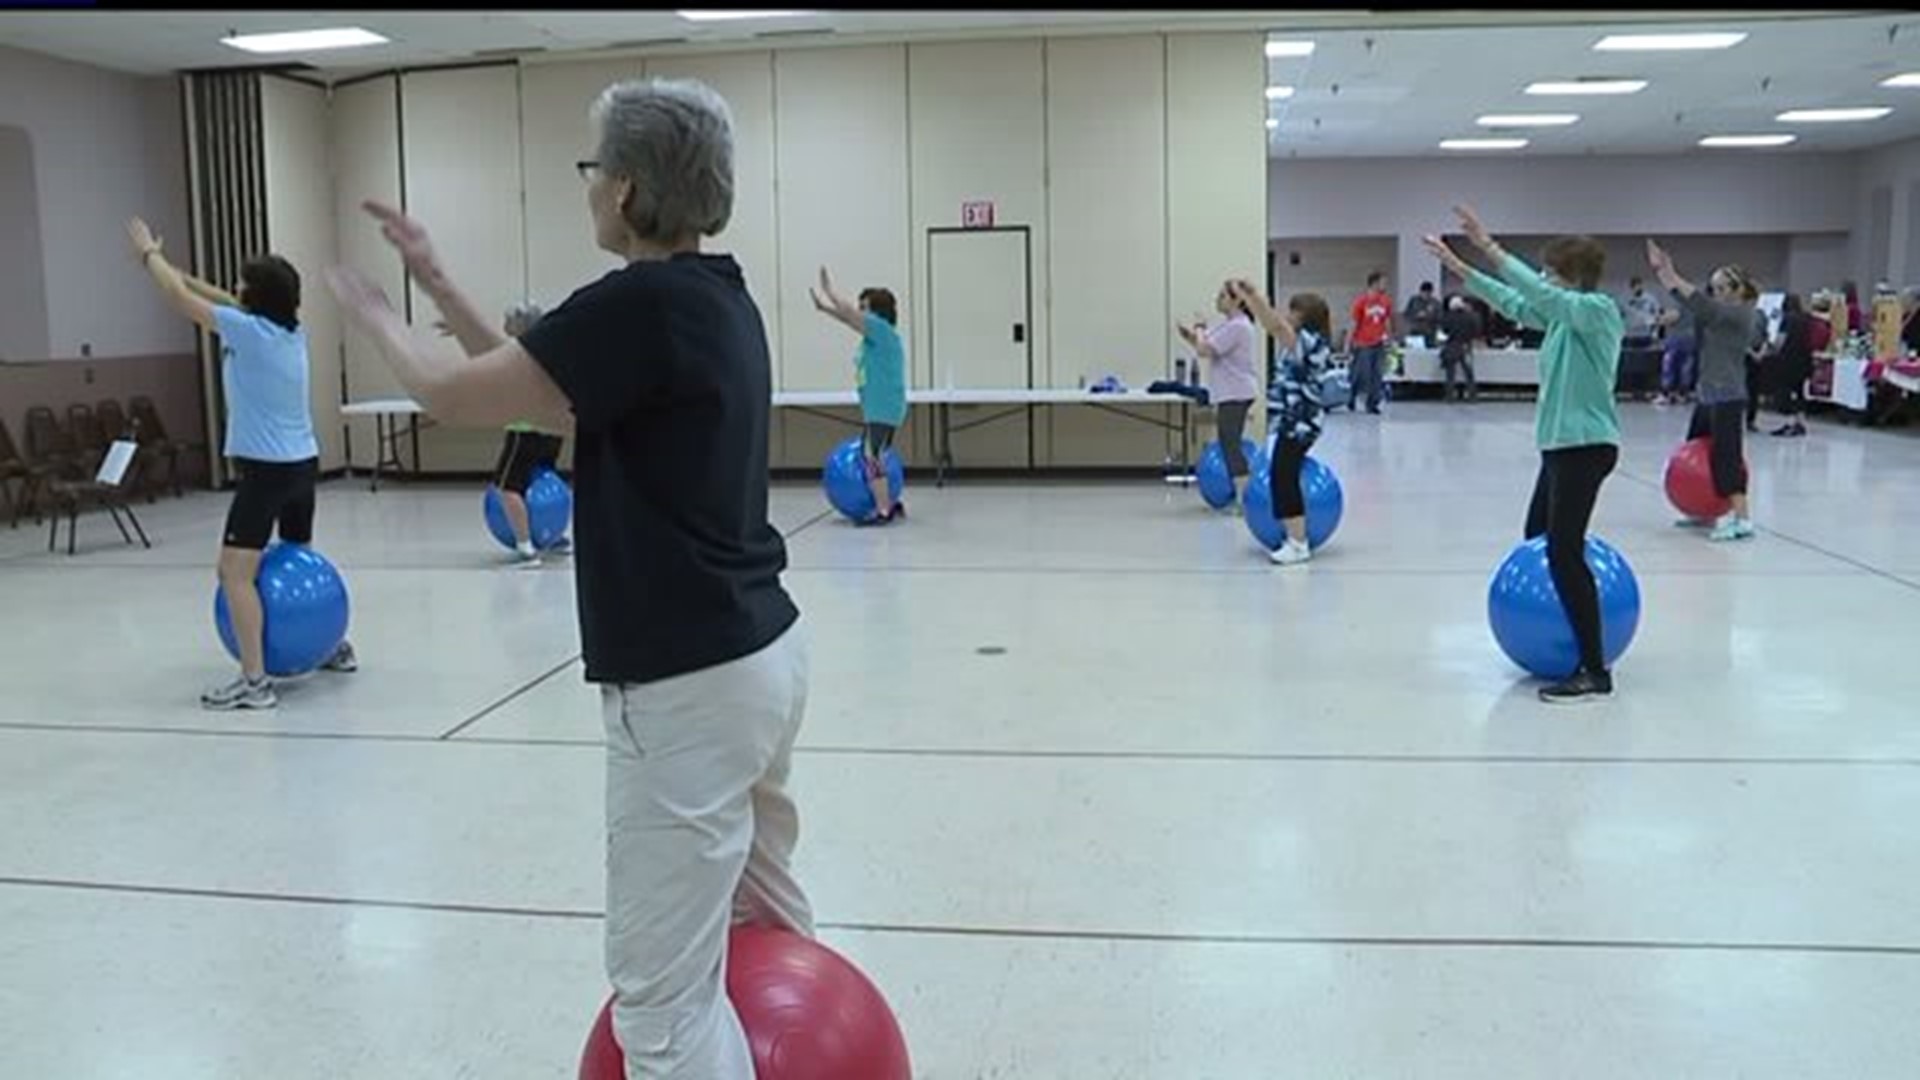 From students to seniors York Health & Wellness Expo offered fitness for the whole family